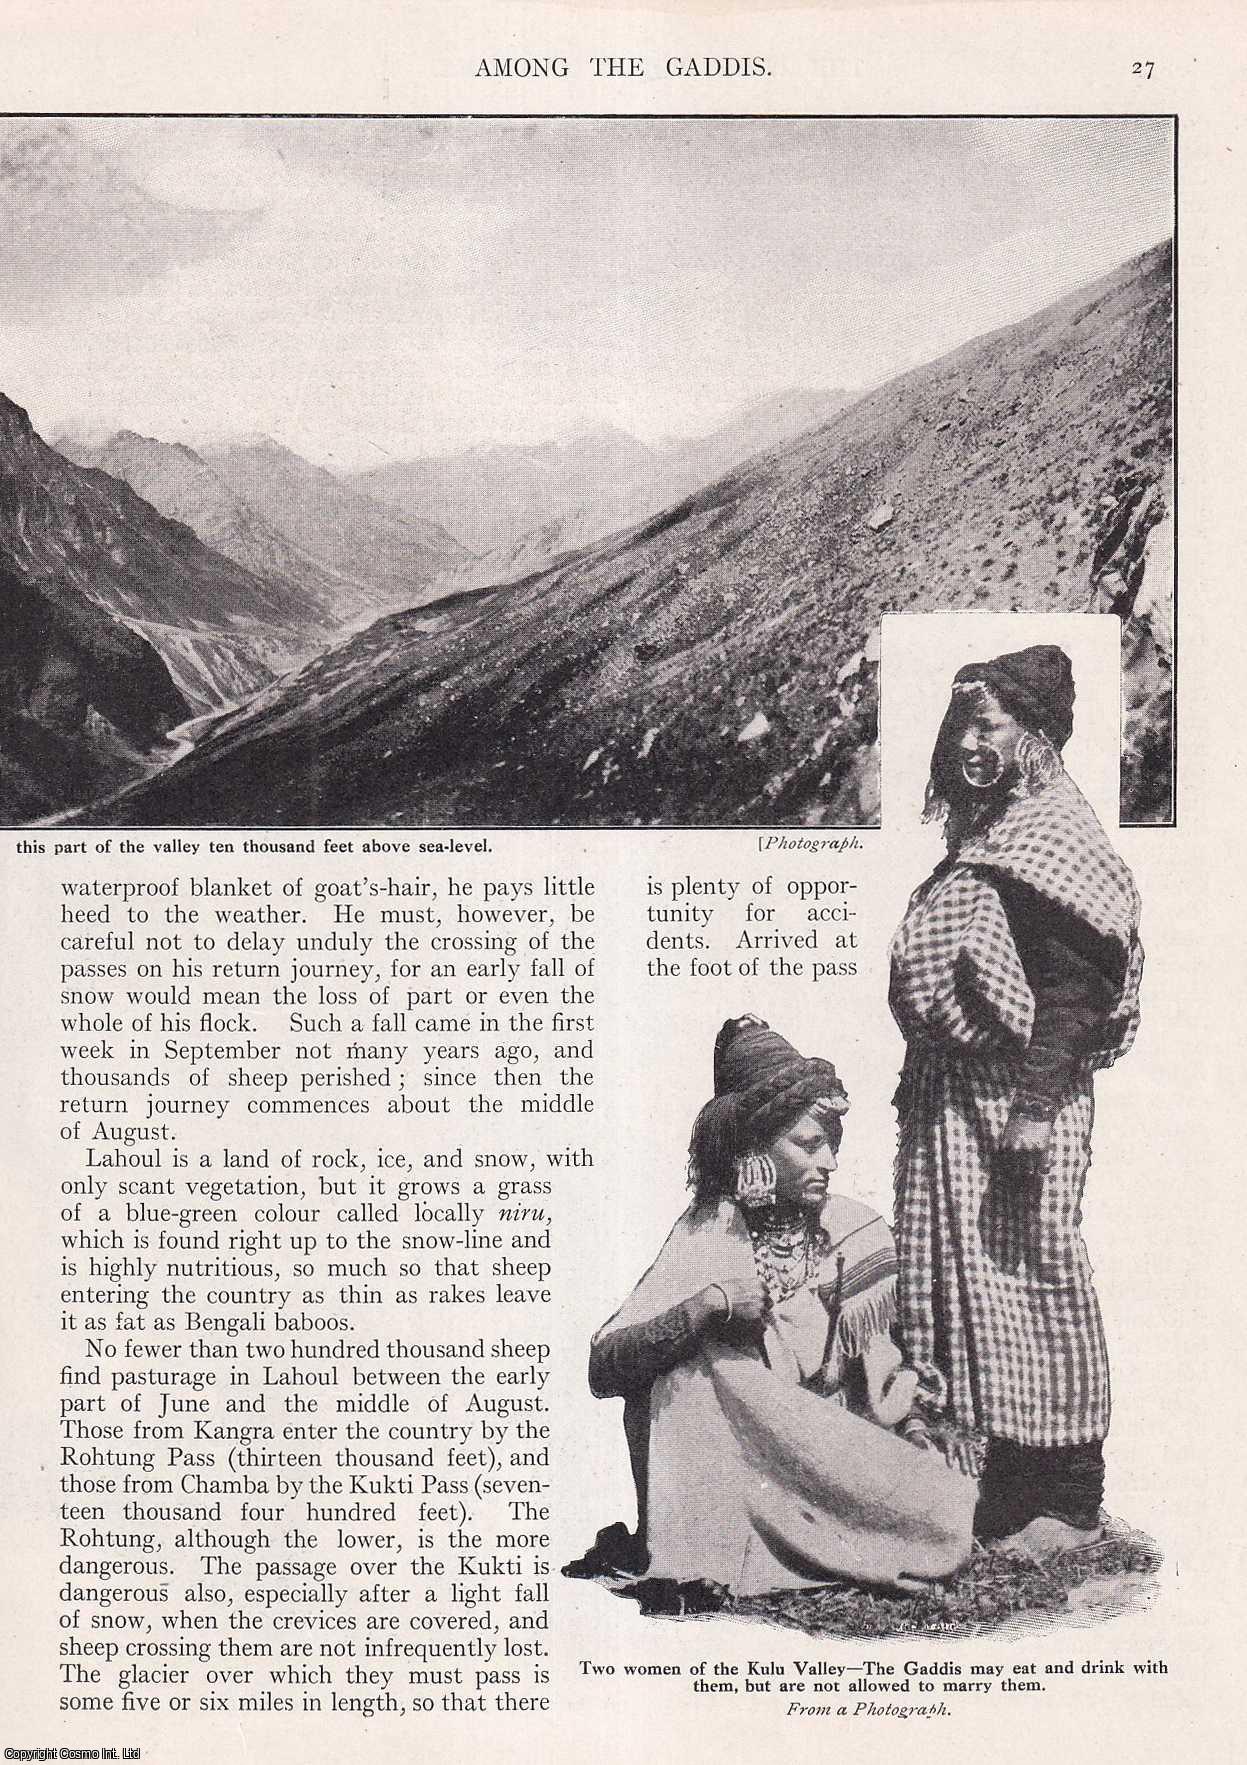 Lieut.-Colonel R.H. Tyacke, of Kulu, Kangra Valley, India. - Among the Gaddis : a little-known tribe of nomad shepherds living in the Central Himalayas. An uncommon original article from the Wide World Magazine, 1911.